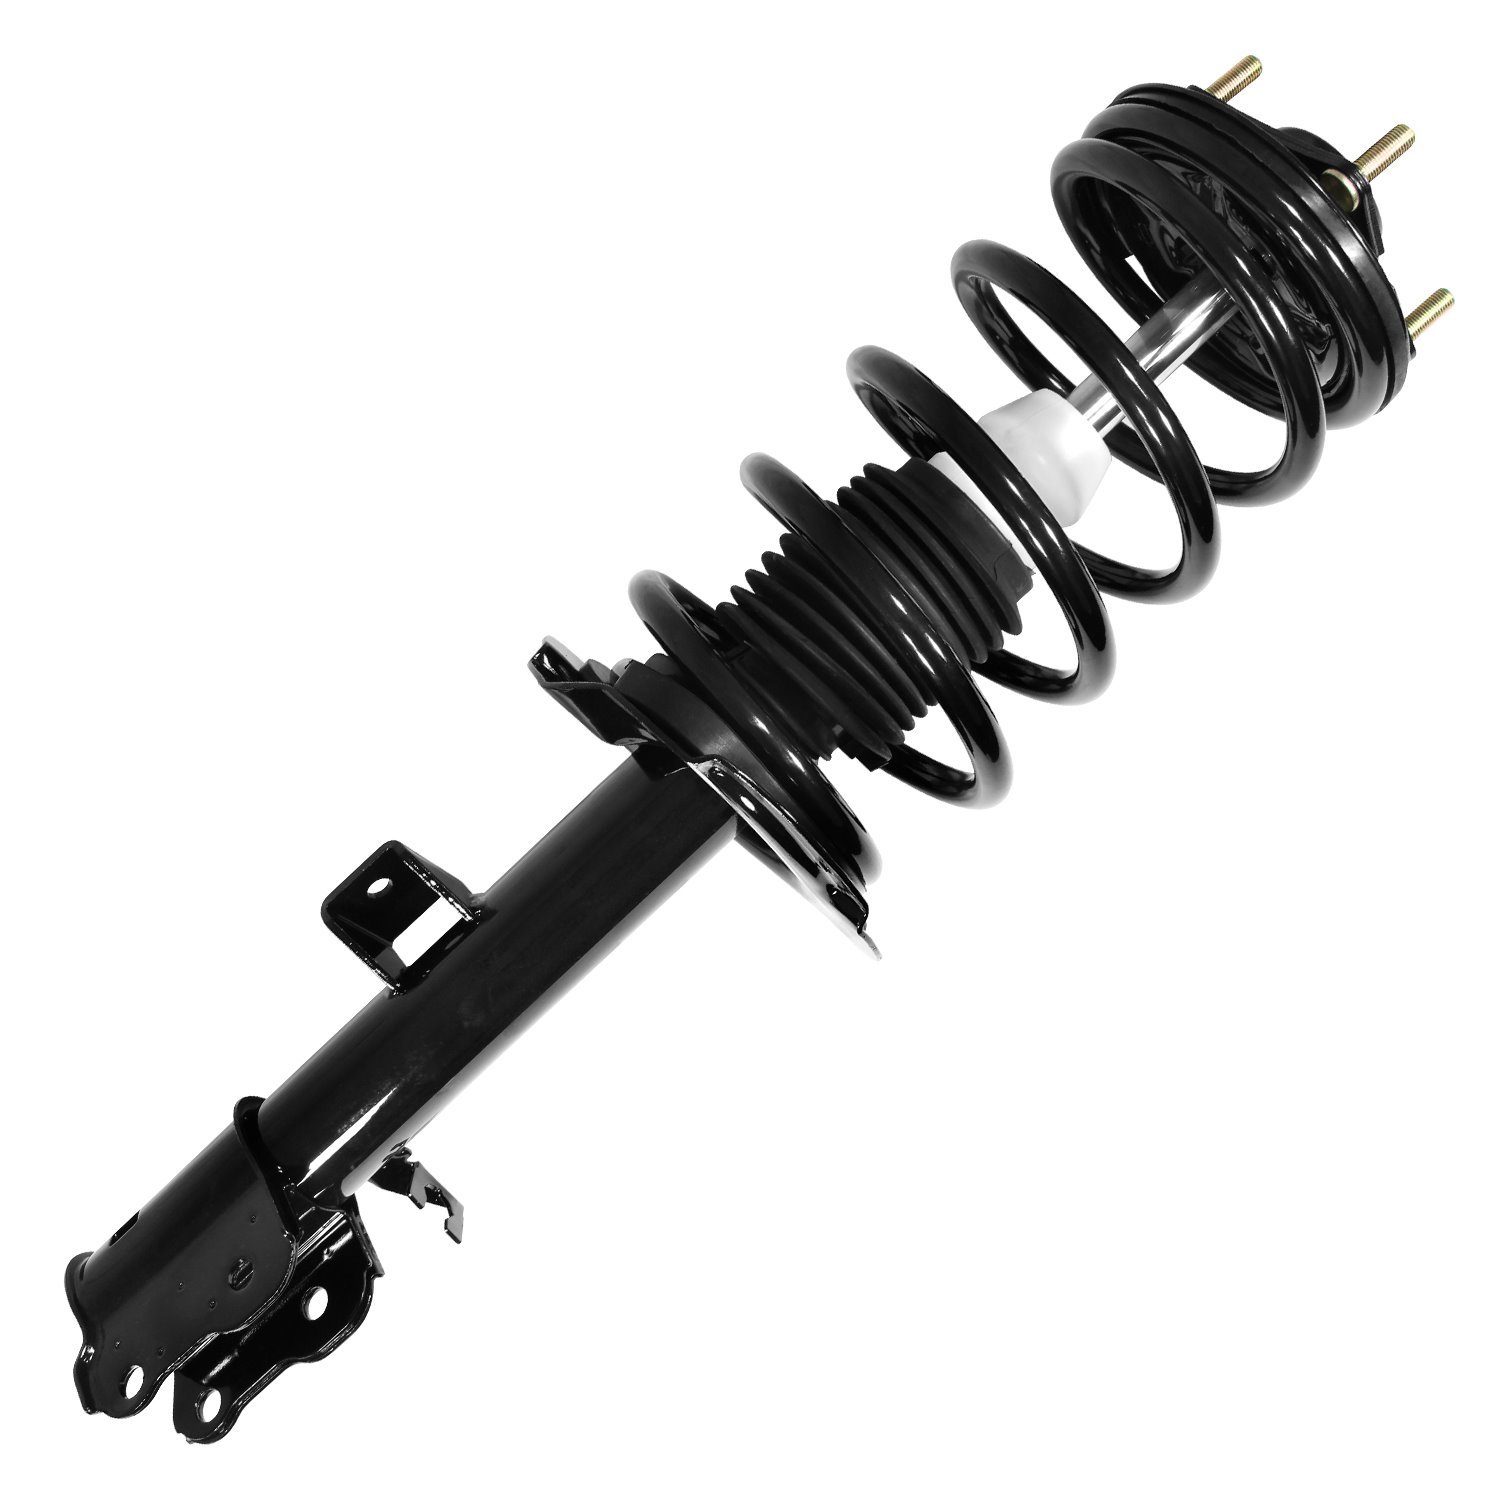 11622 Suspension Strut & Coil Spring Assembly Fits Select Ford Escape, Mercury Mariner, Mazda Tribute